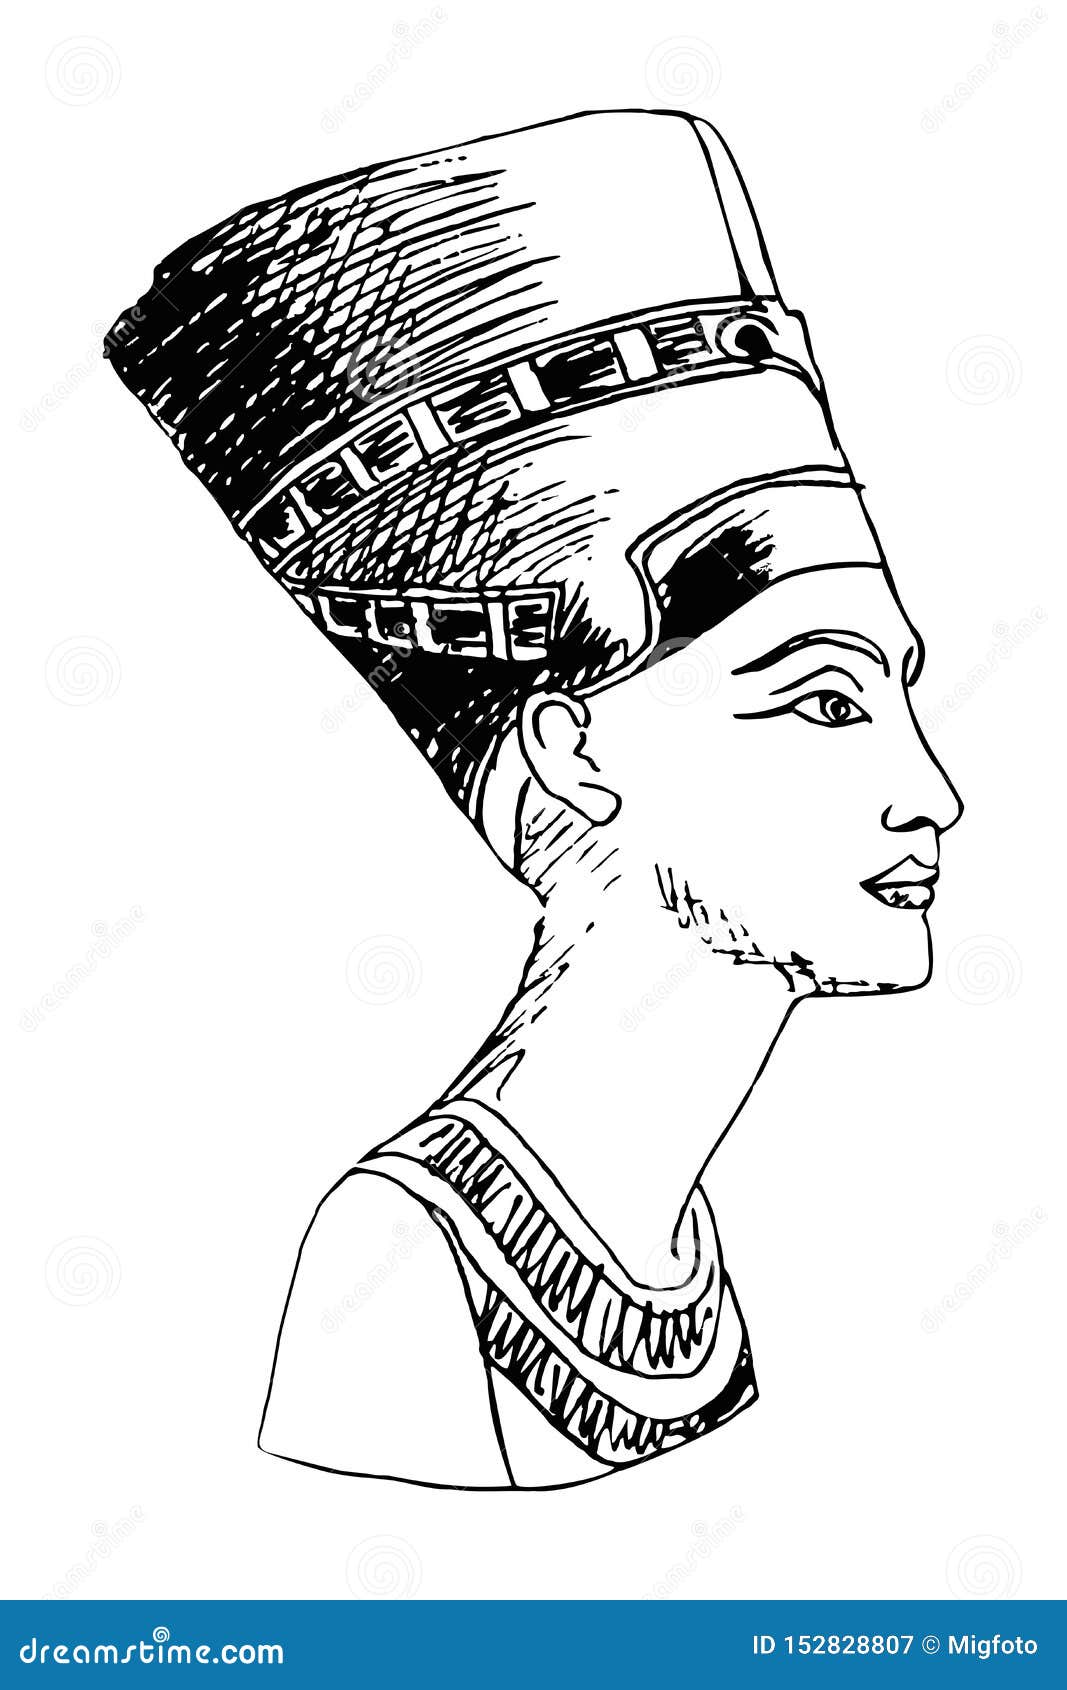 1480 Cleopatra Drawings Images Stock Photos  Vectors  Shutterstock